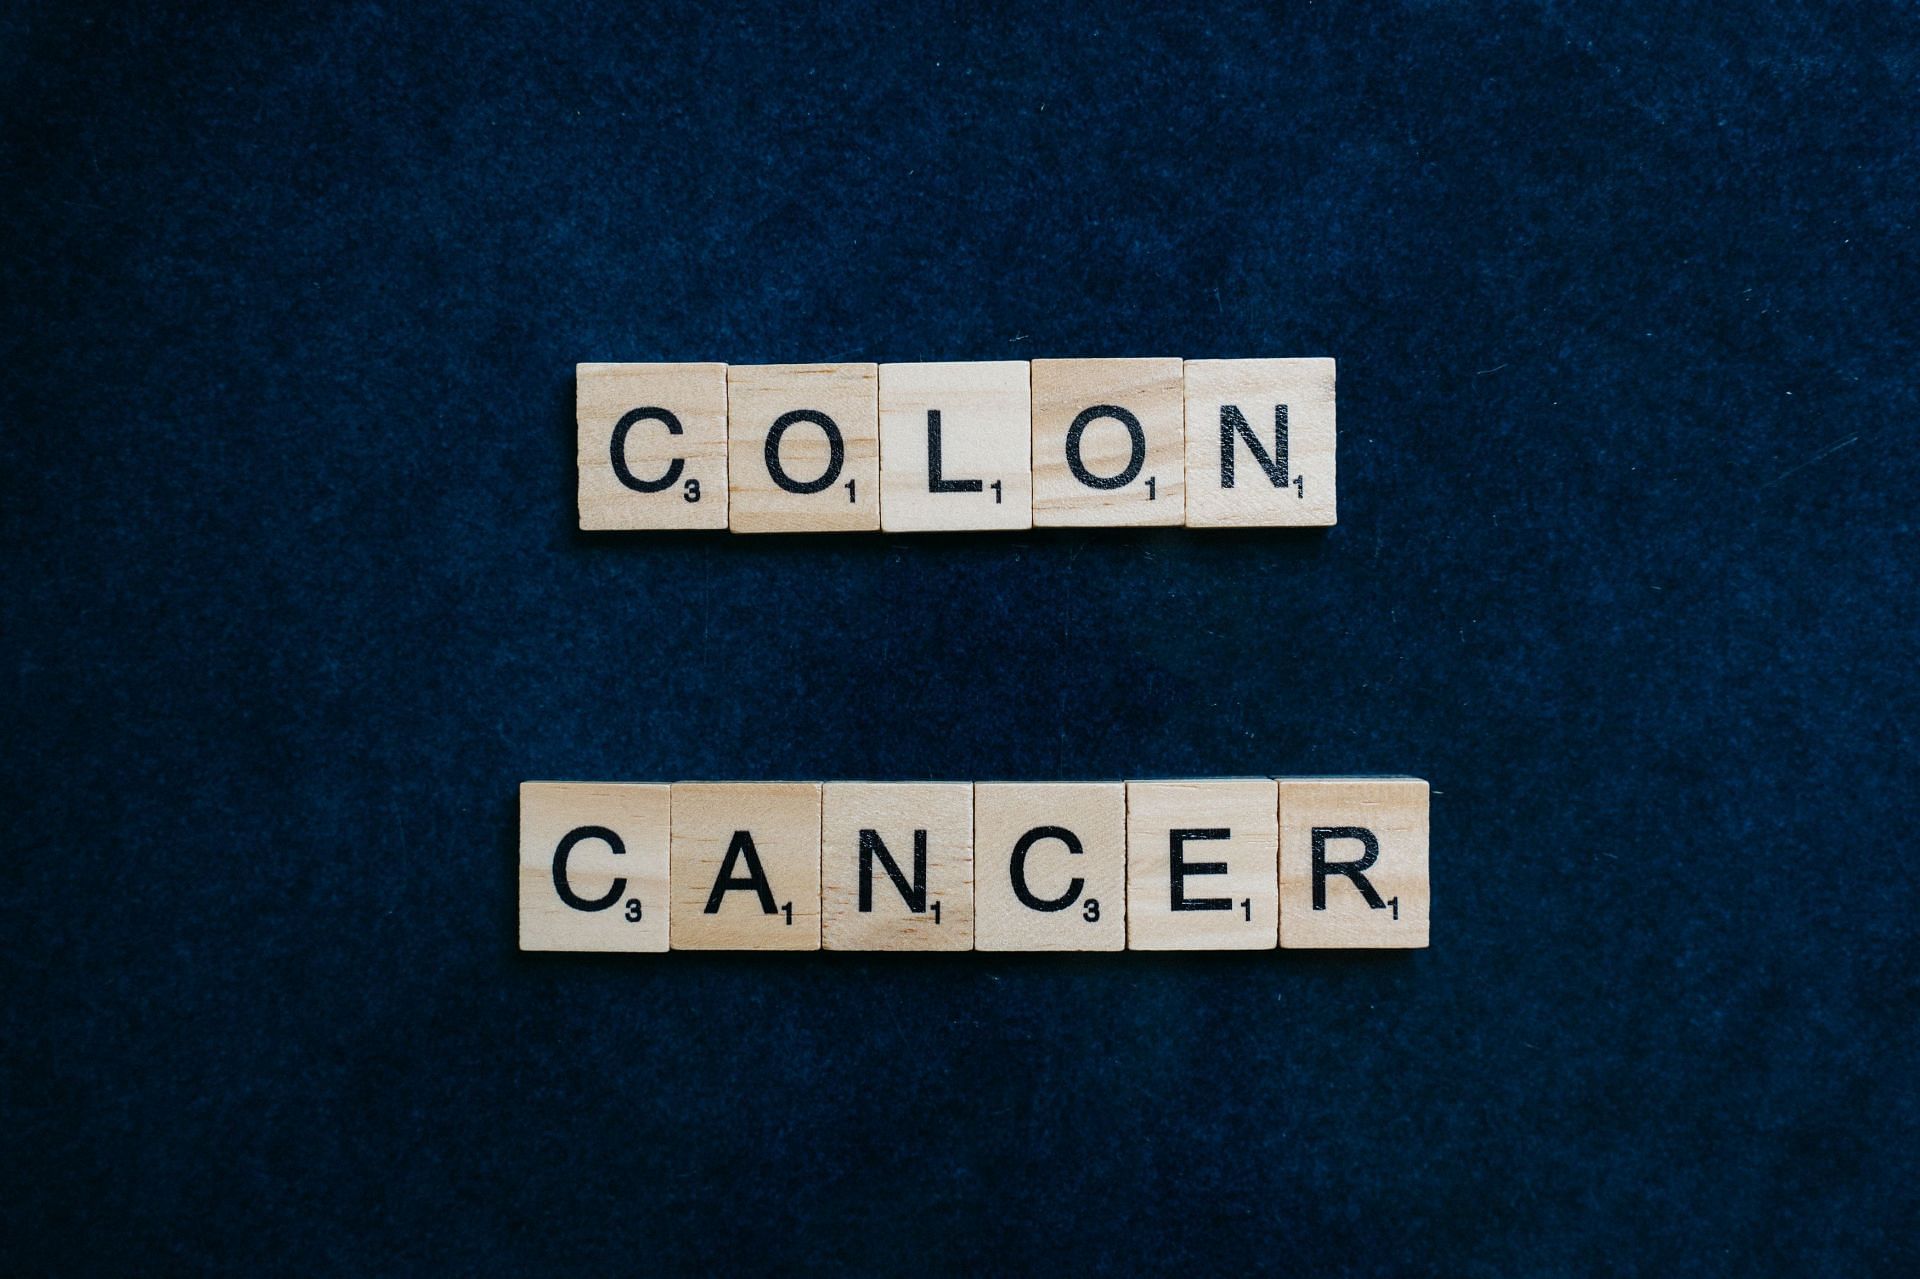 This type of cancer can be treated when diagnosed in early stages. (Image via Pexels/Anna Tarazevich)